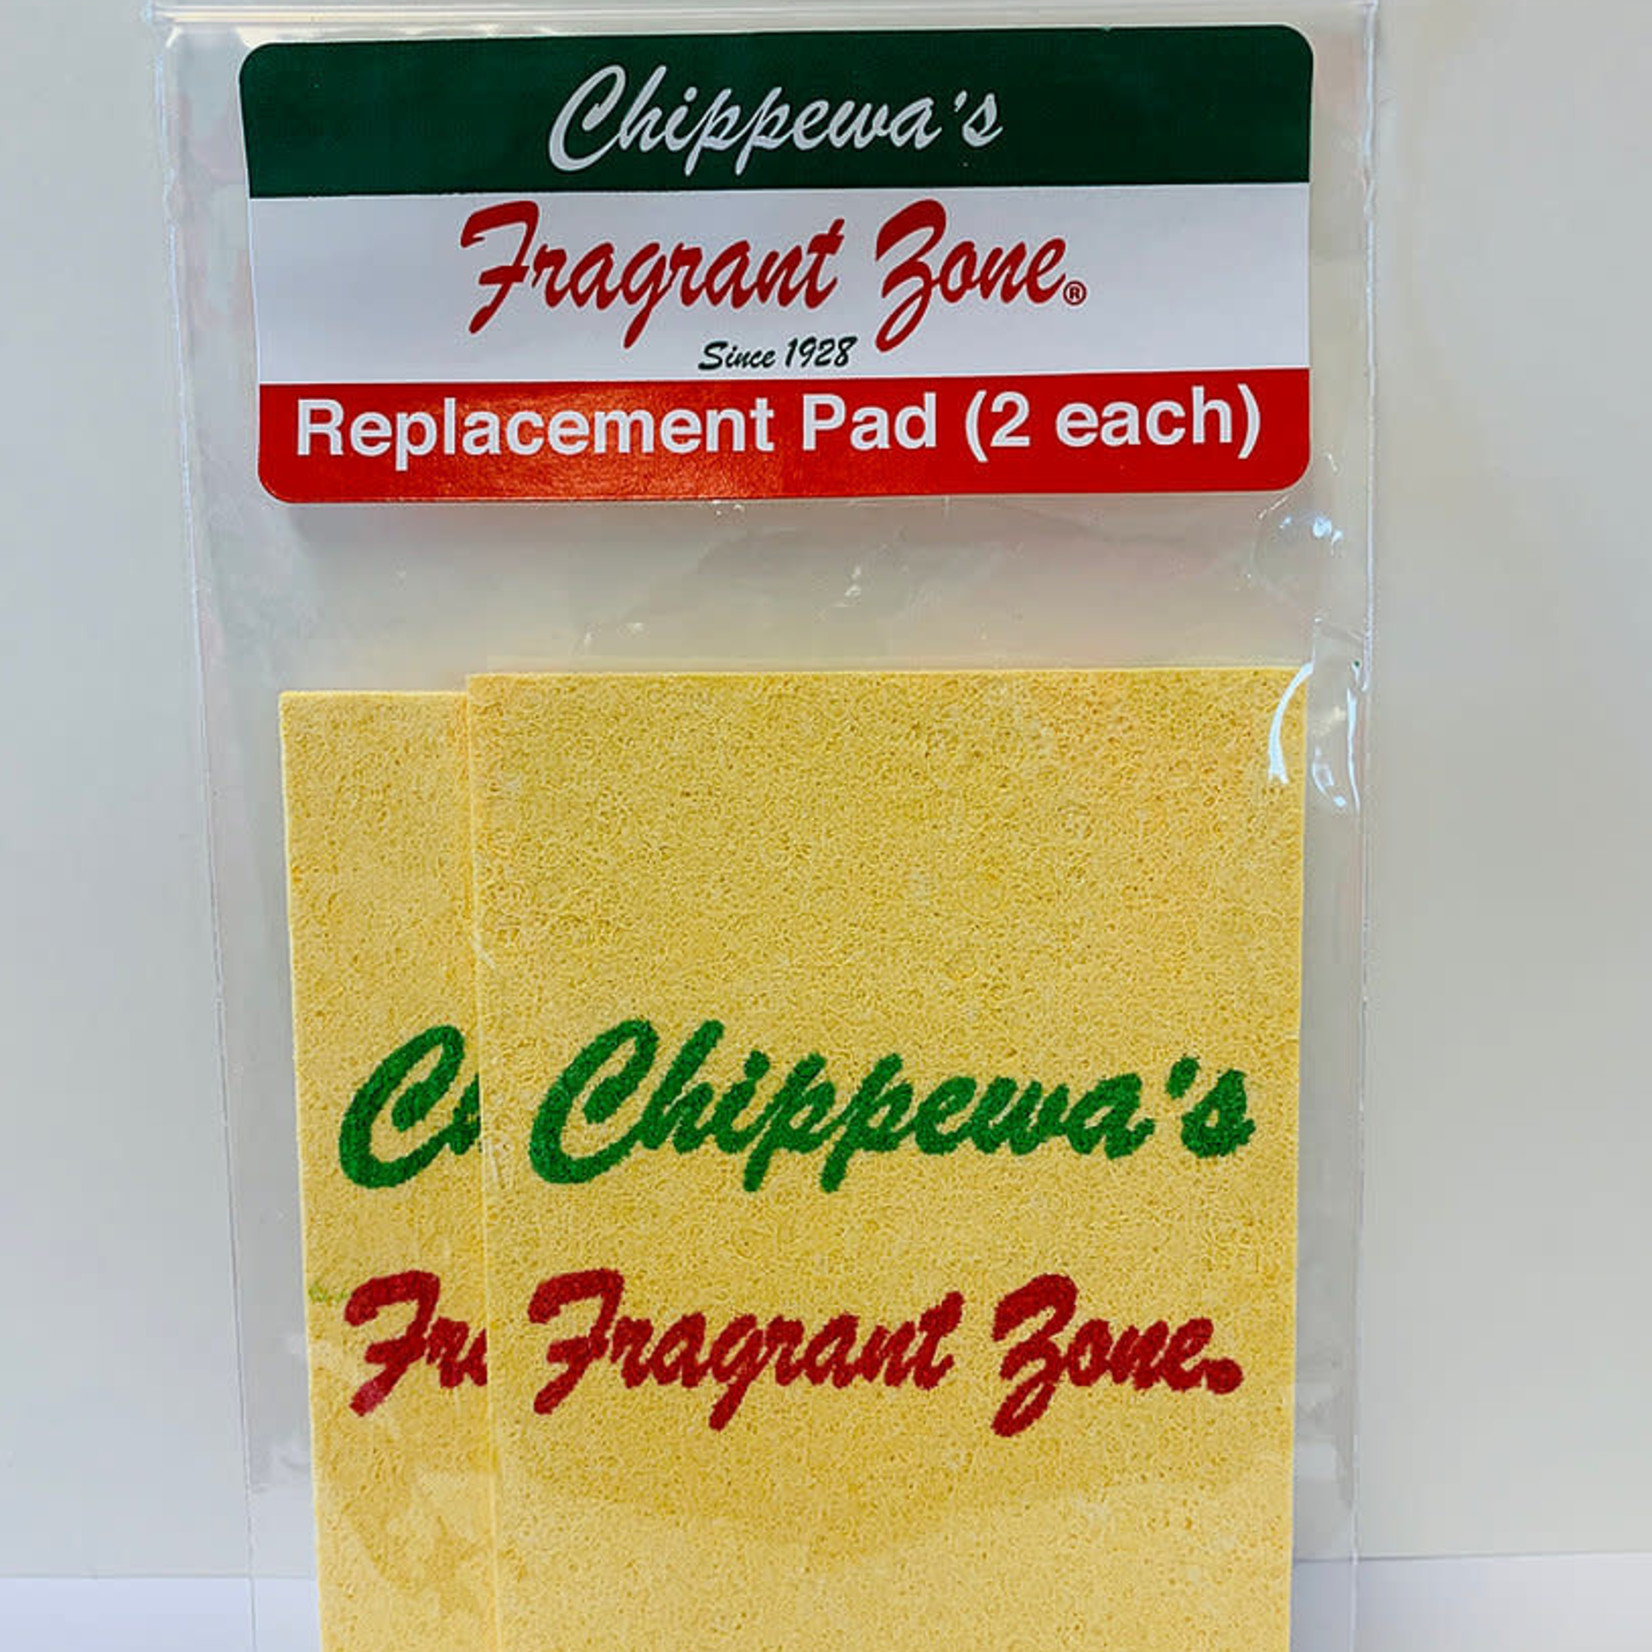 Chippewa's Rectangular Diffuser Tin Replacement Pad (2 each)